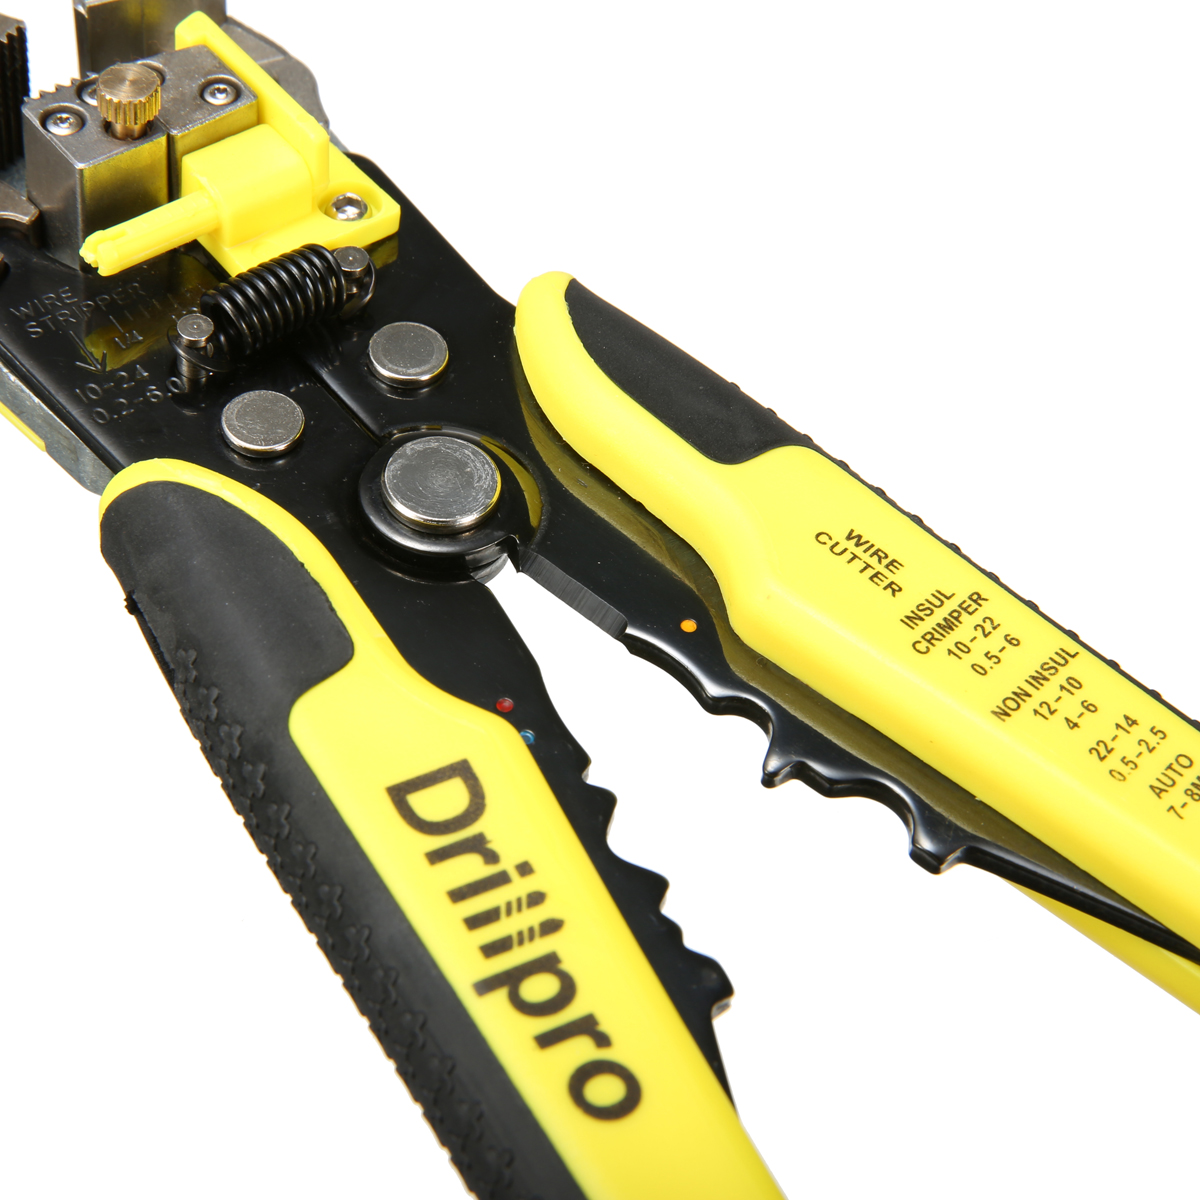 Automatic Multi-Gauge Adjustable Wire Cable Stripper & Cutter up to 10 AWG Wire 